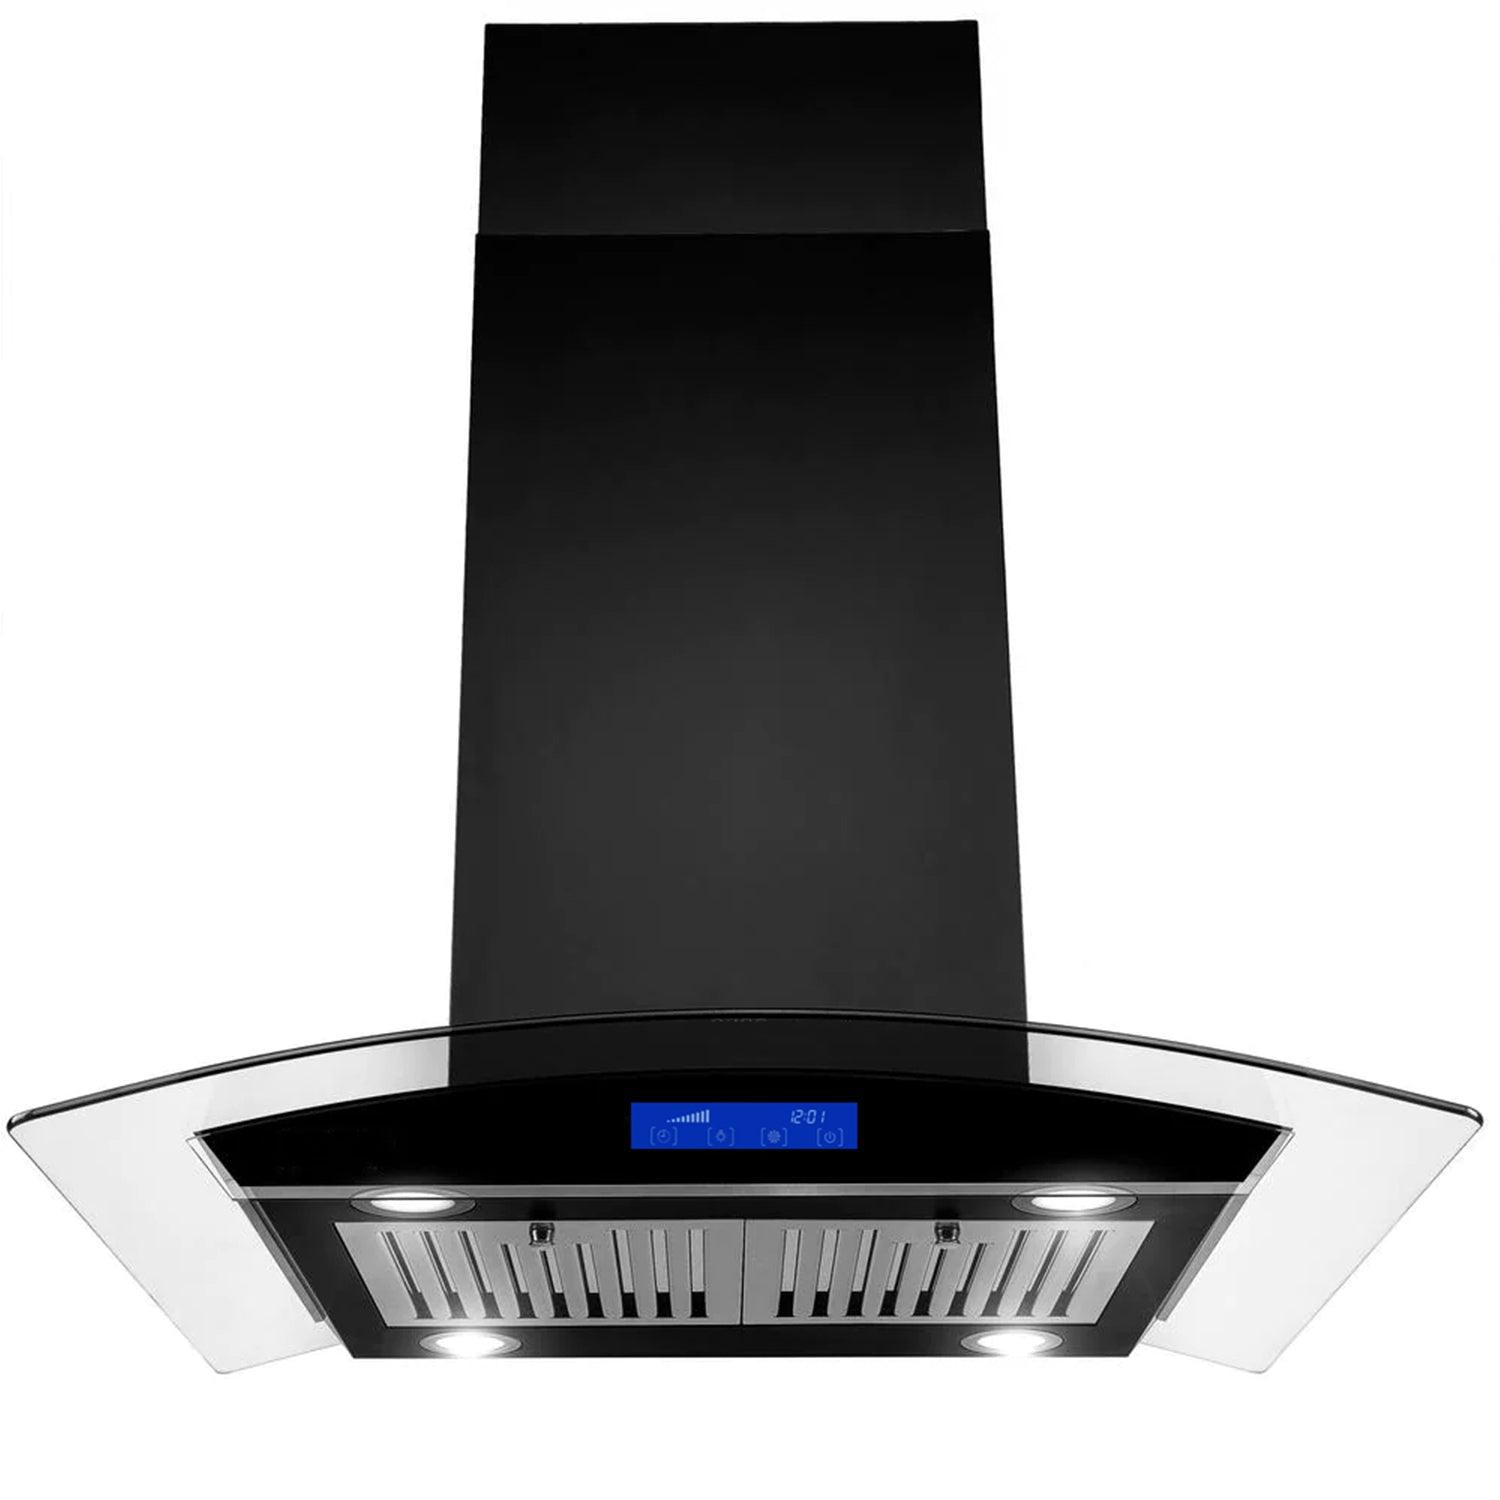 Tieasy 36 inch Island Mount Range Hood 700CFM with 4 LED Lights and Baffle filter